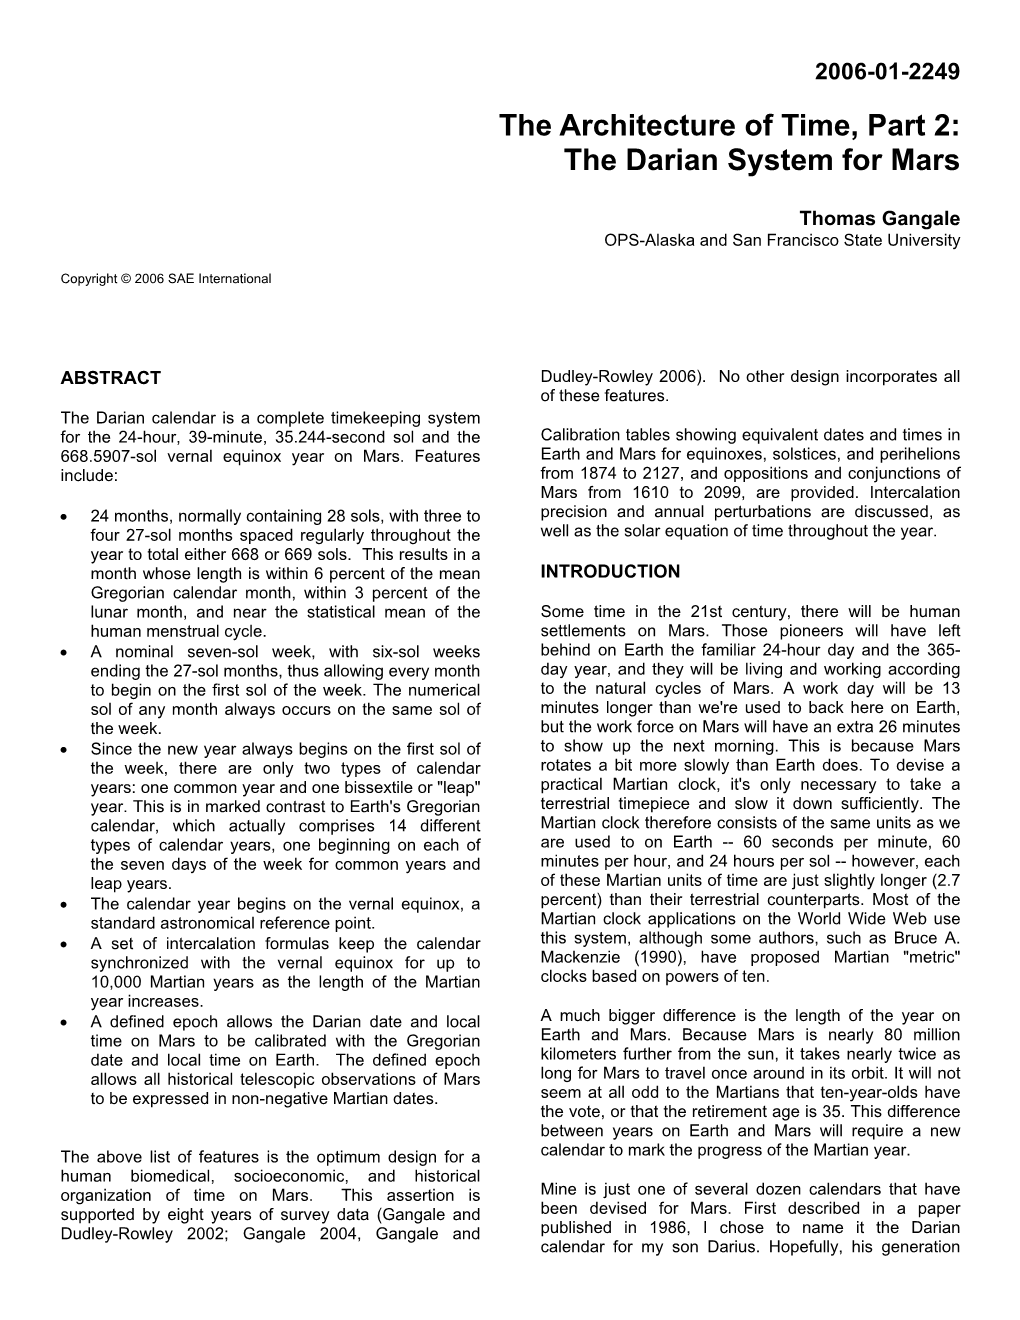 The Darian System for Mars